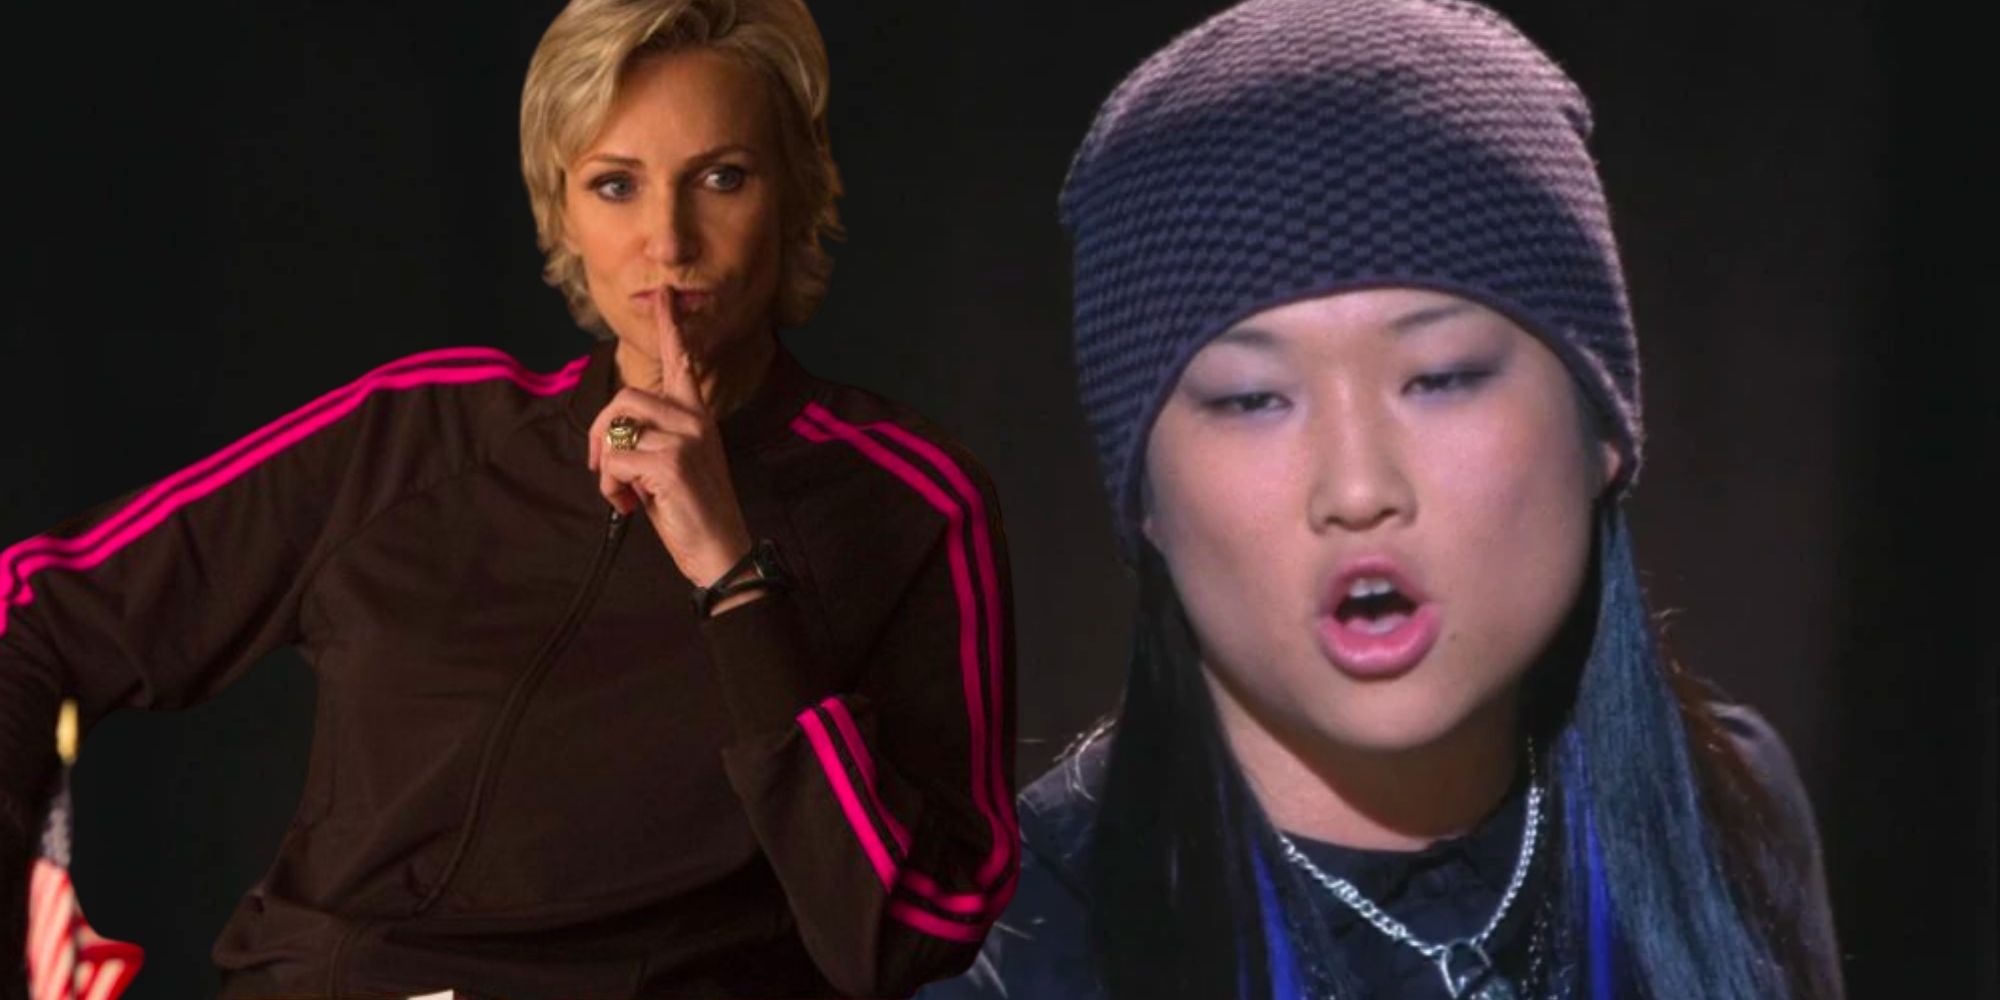 Jenna Ushkowitz Jane Lynch in Glee as Sue Sylvester and Tina Cohen Chang Singing